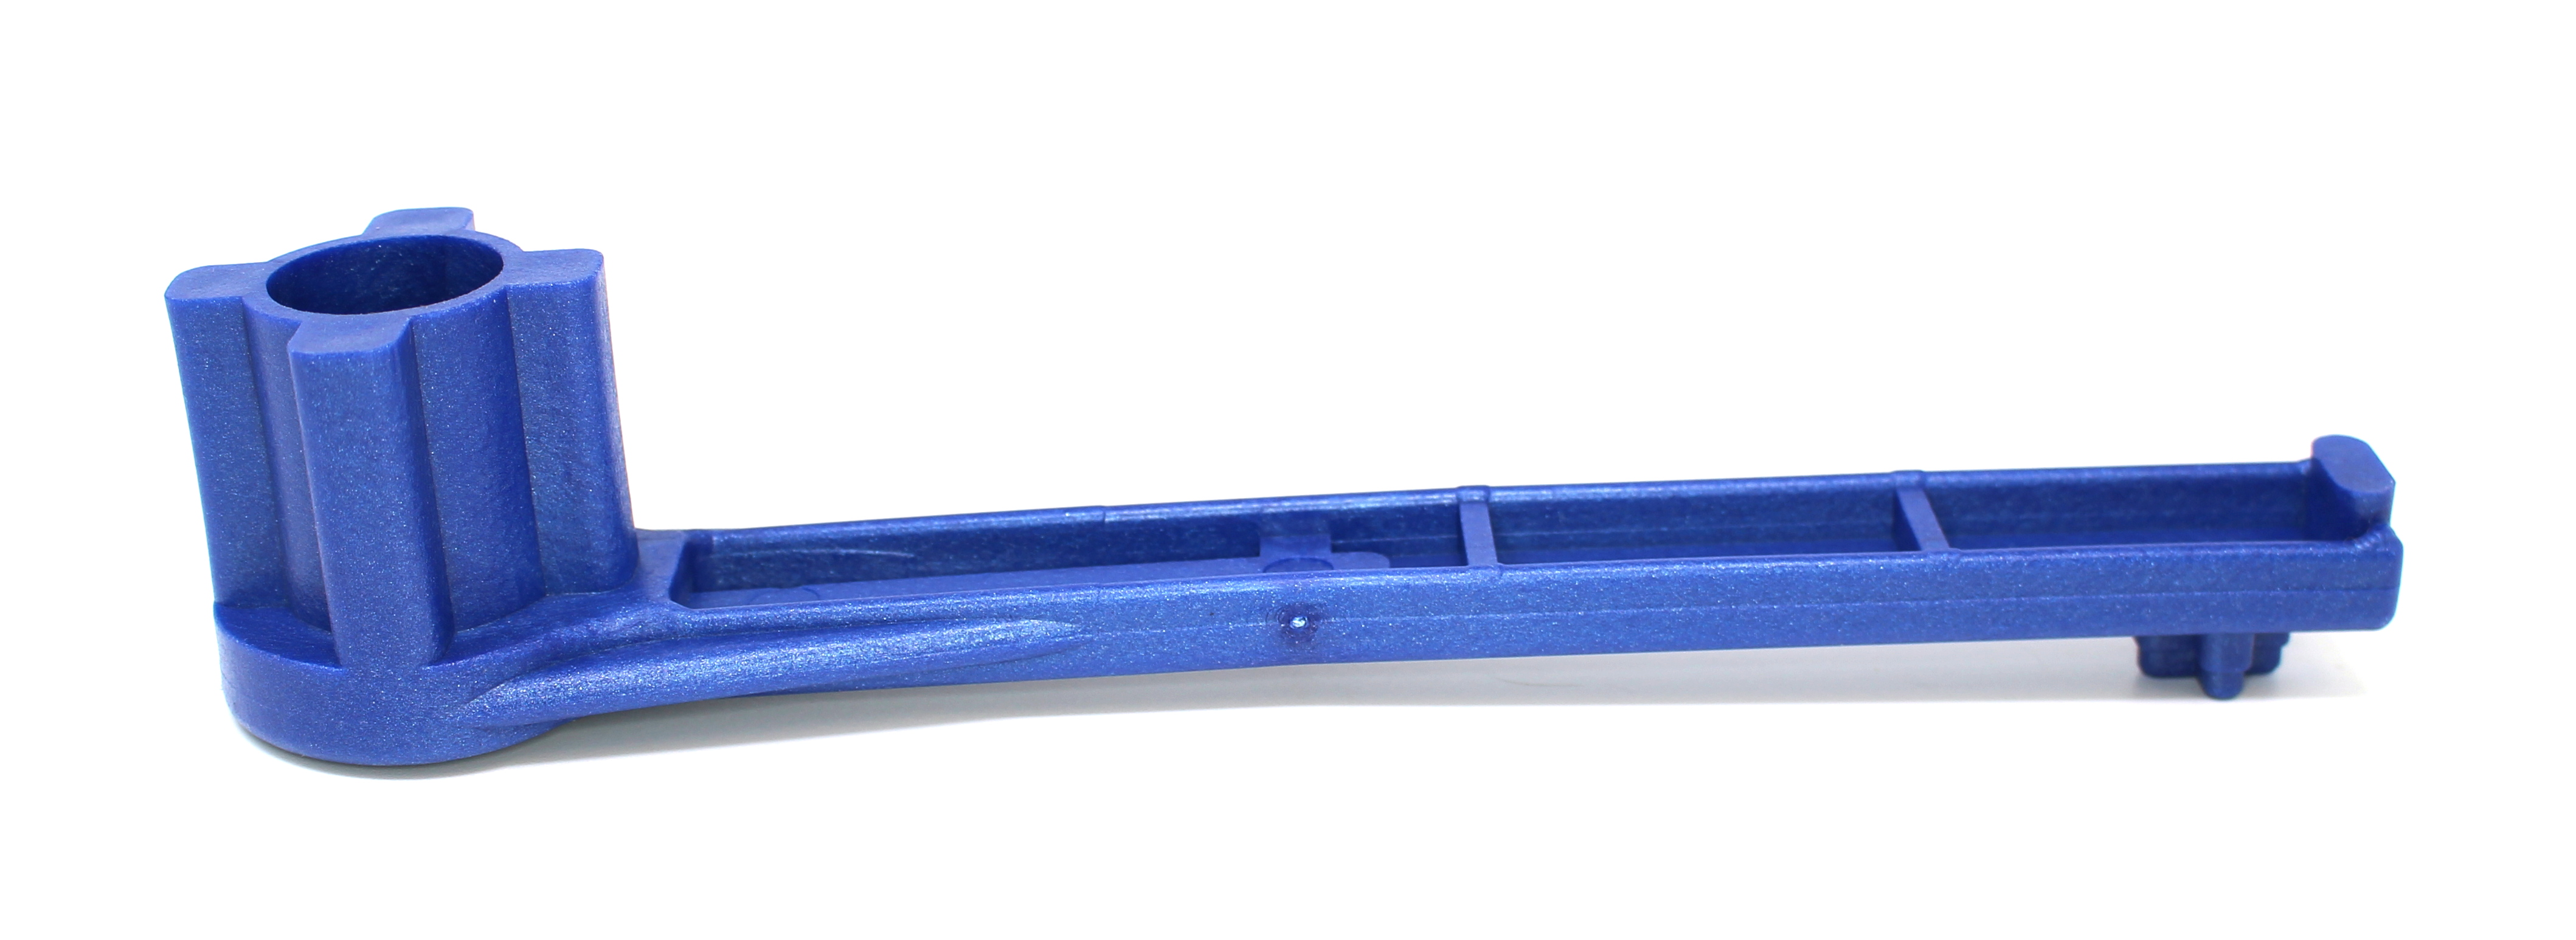 Gas and Bung Wrench Non Sparking Solid Drum Bung Nut Wrench (BLUE) - image 2 of 9